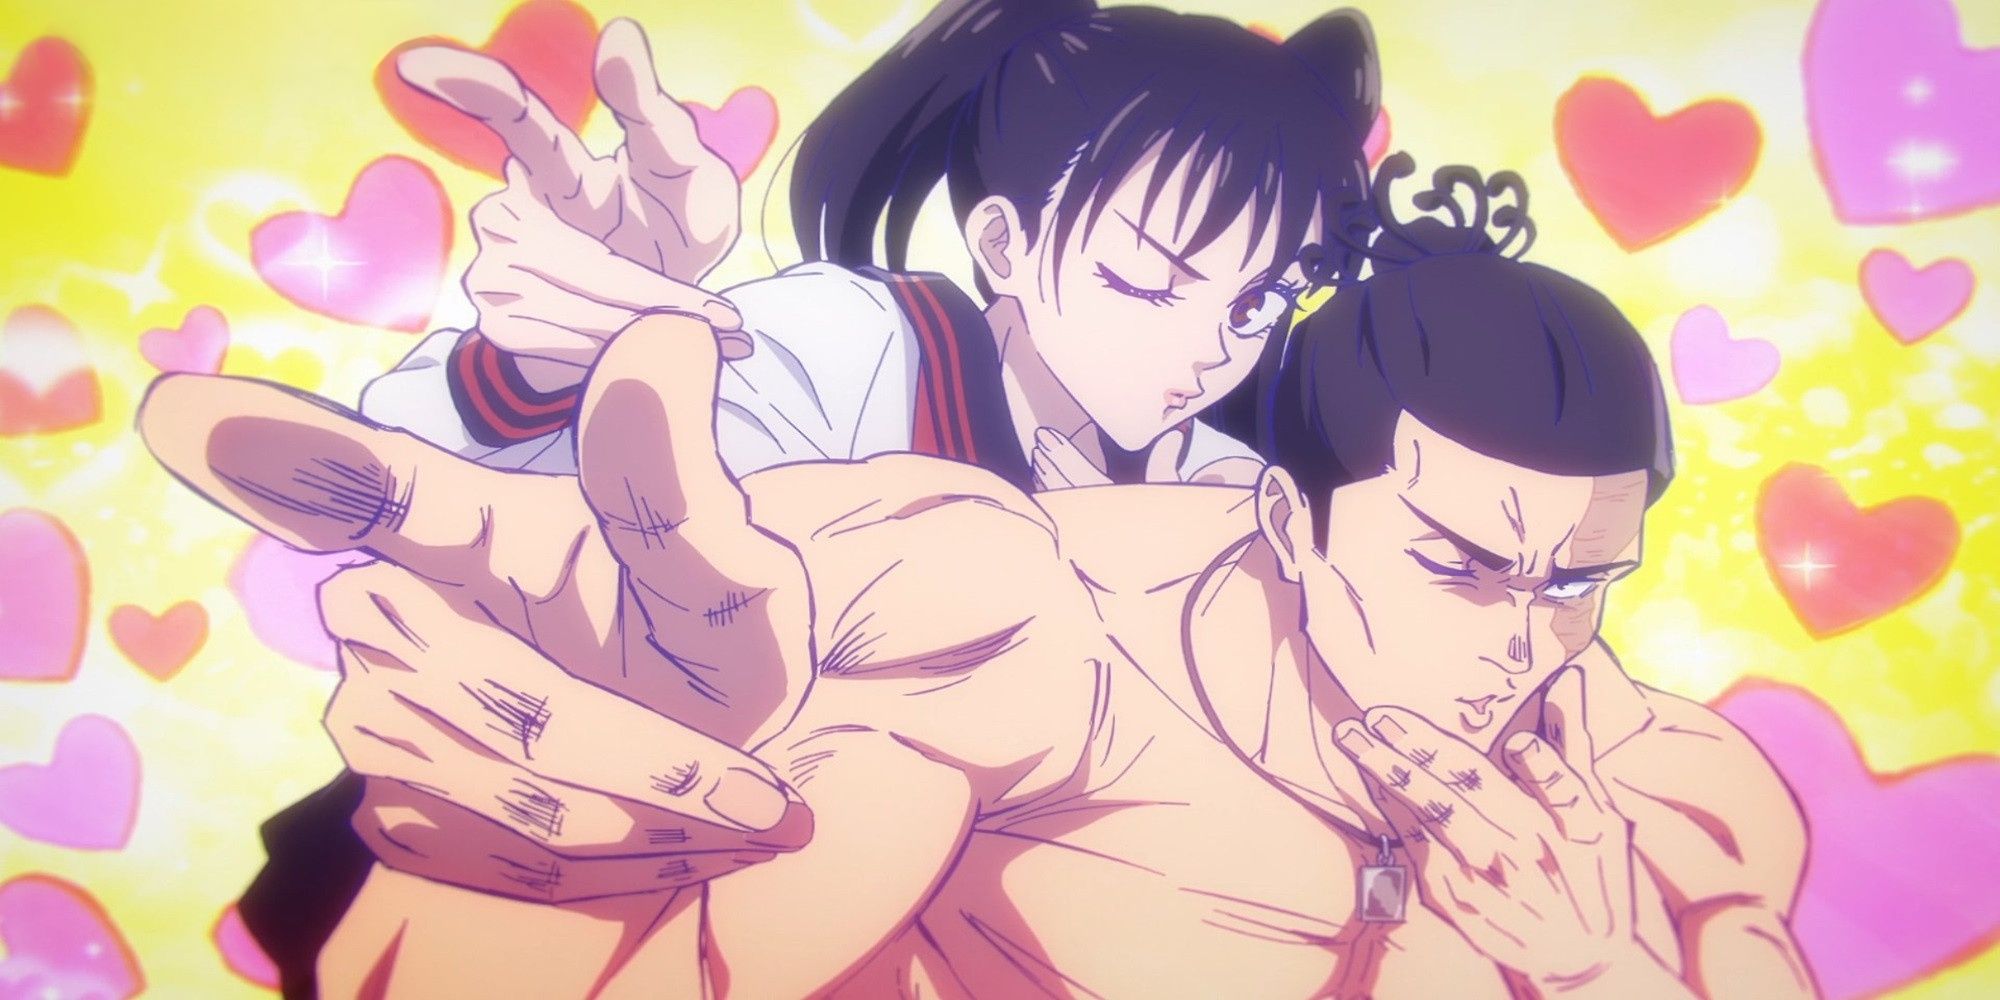 Todo Aoi and Takada pointing with hearts behind them in Jujutsu Kaisen episode 21